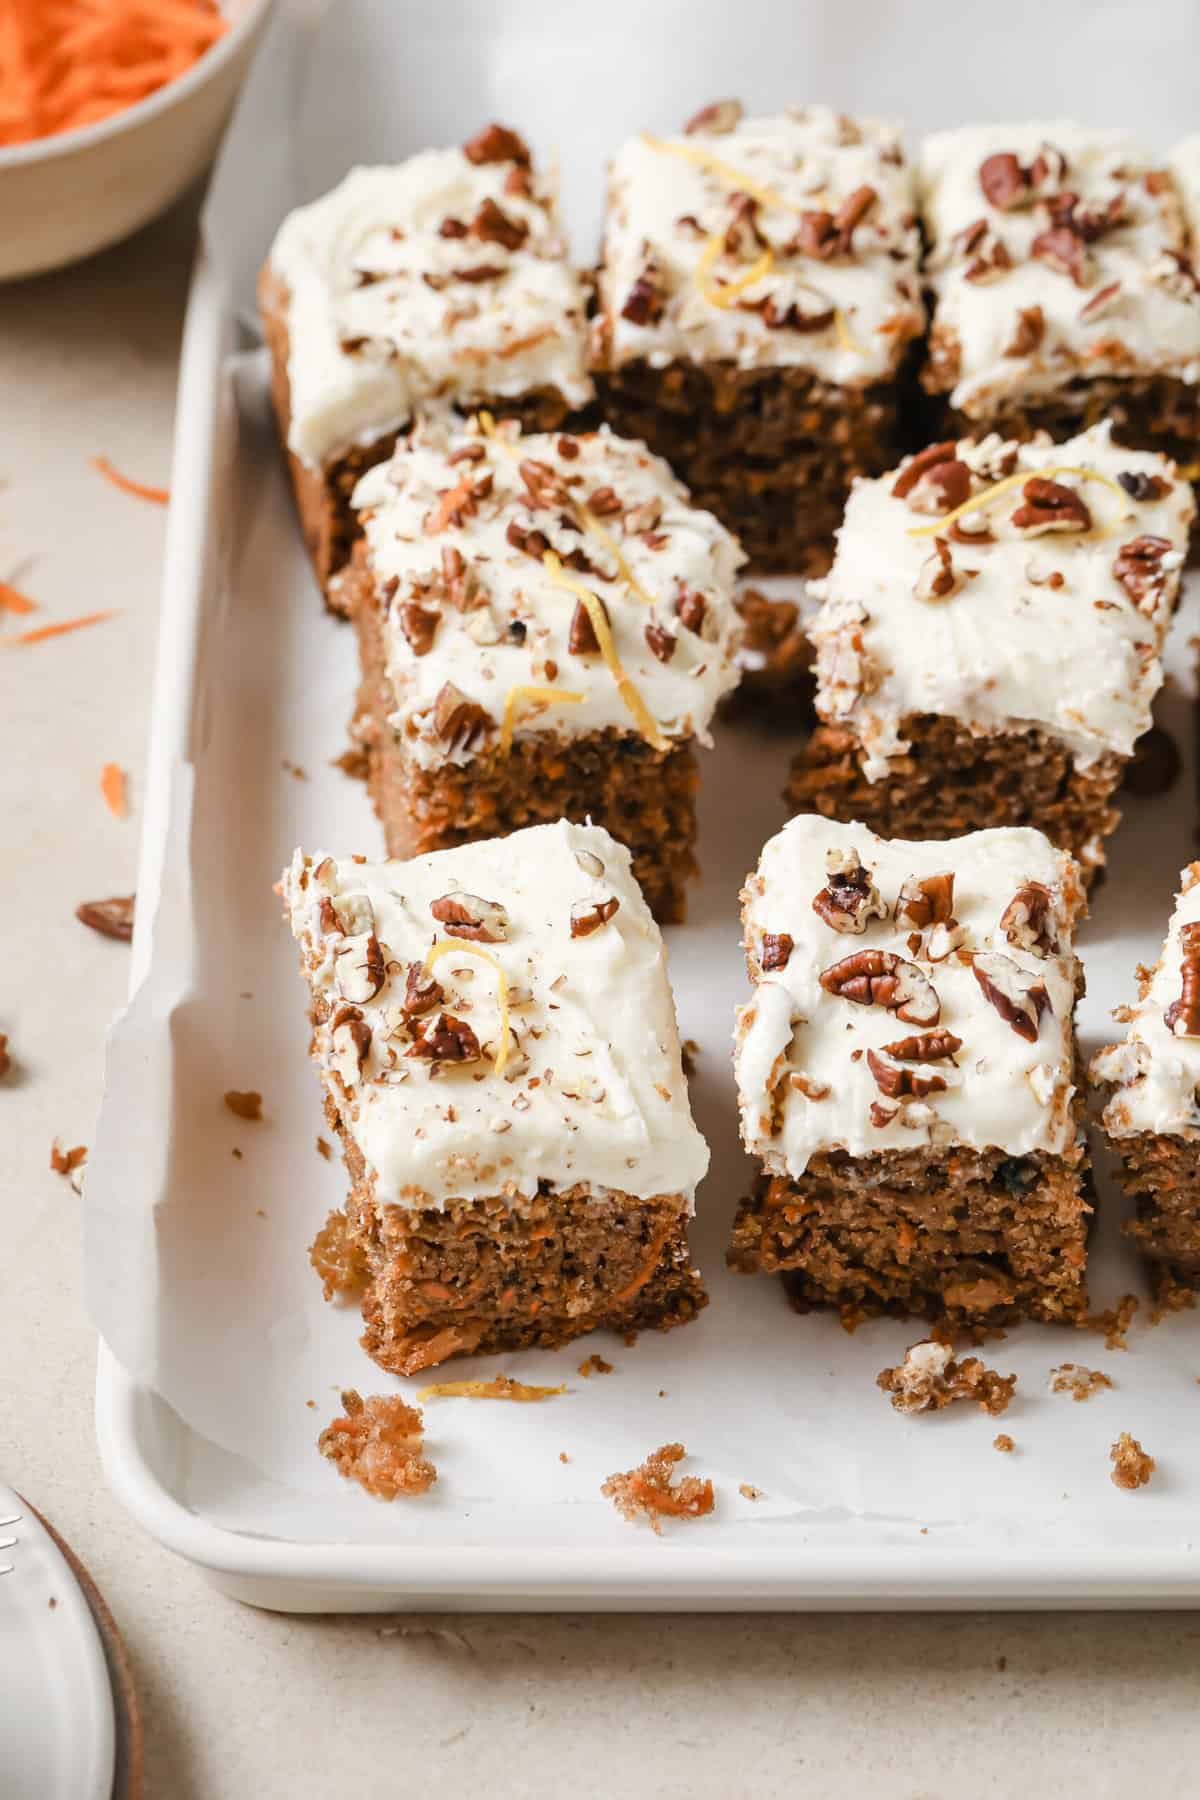 Grain-Free and Dairy-Free Carrot Cake